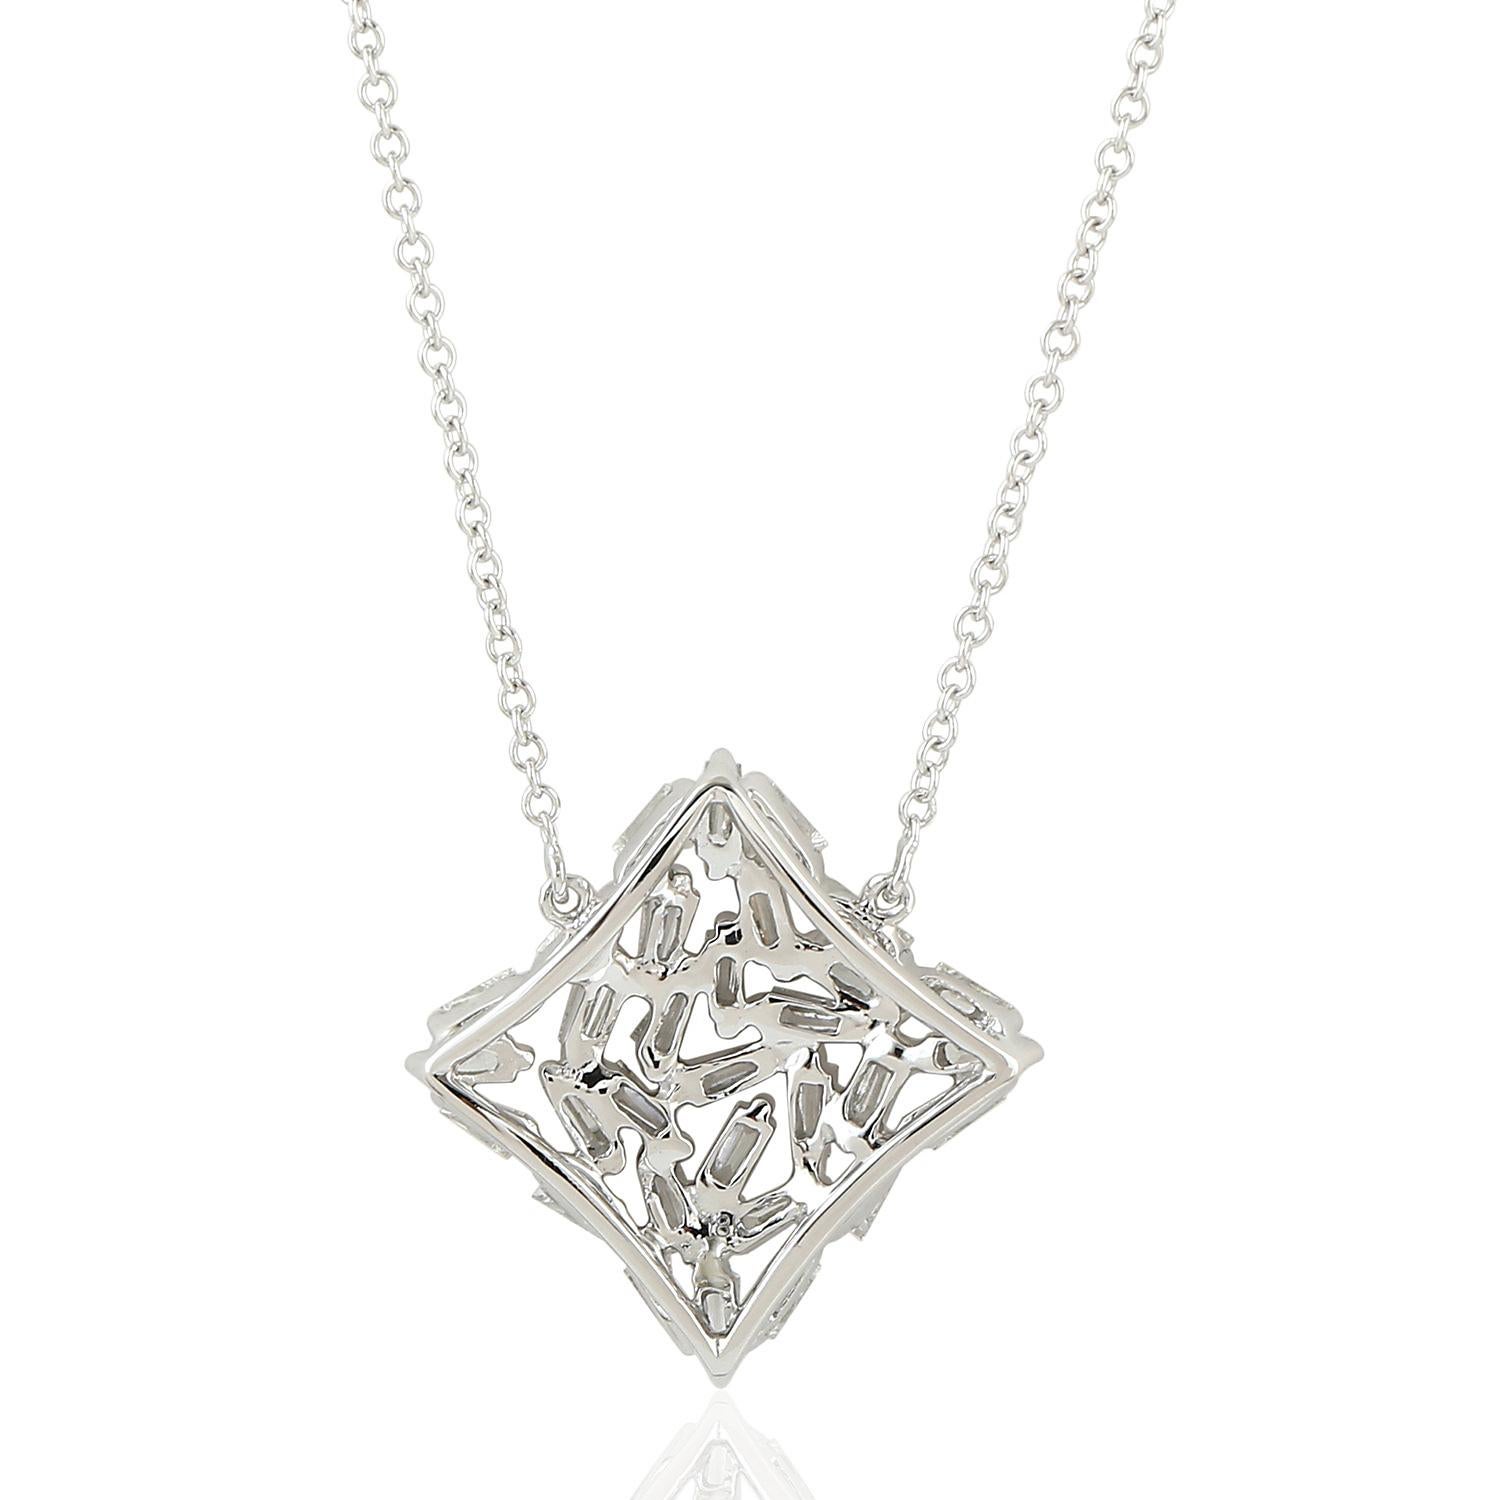 Baguette Cut Designer Princess Necklace Made In 18k White Gold With Baguette Diamonds Charm For Sale